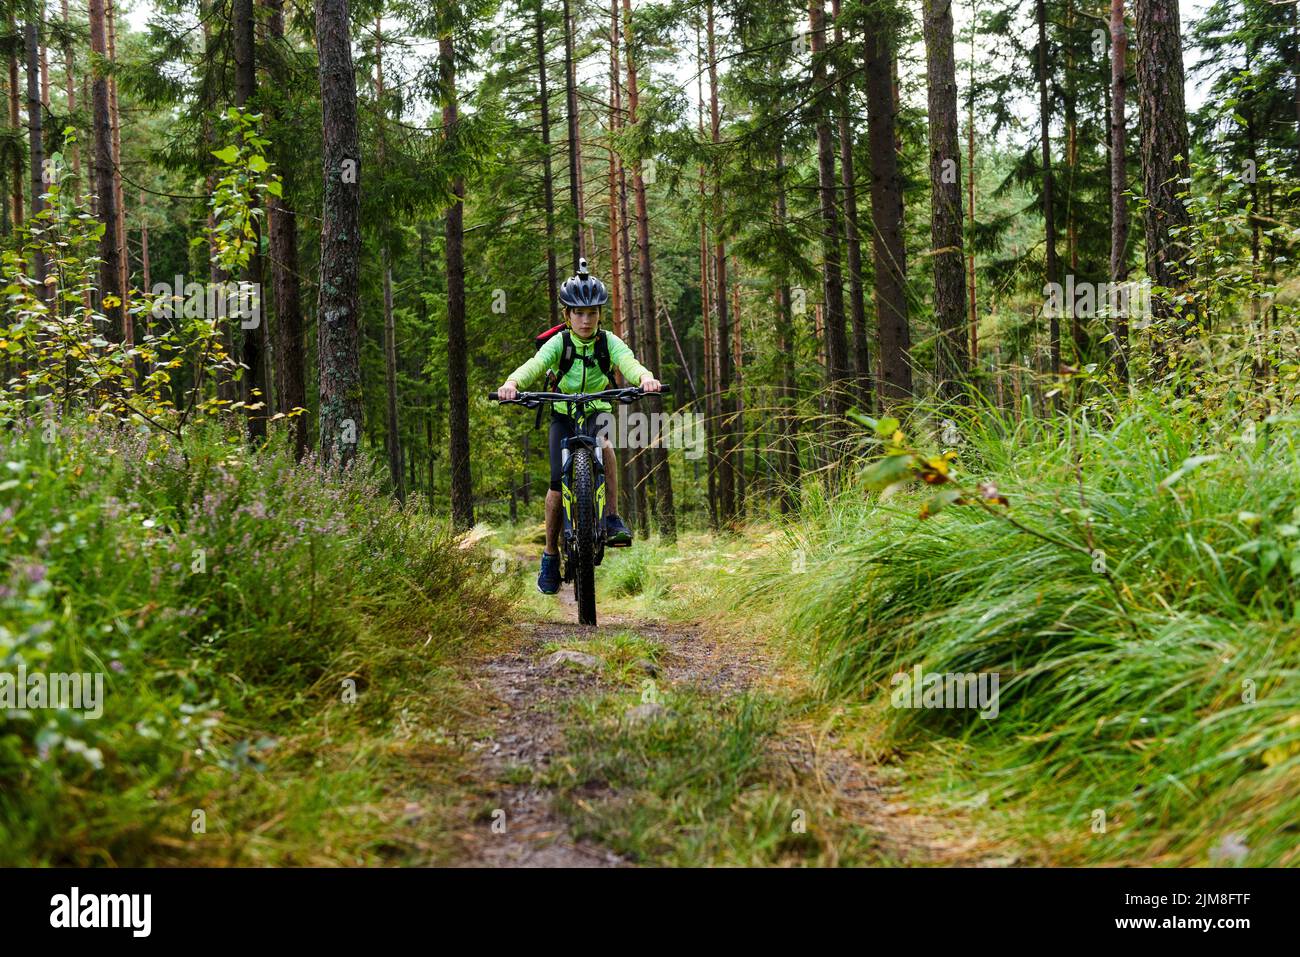 Young boy cycle mountain bike in forest Stock Photo